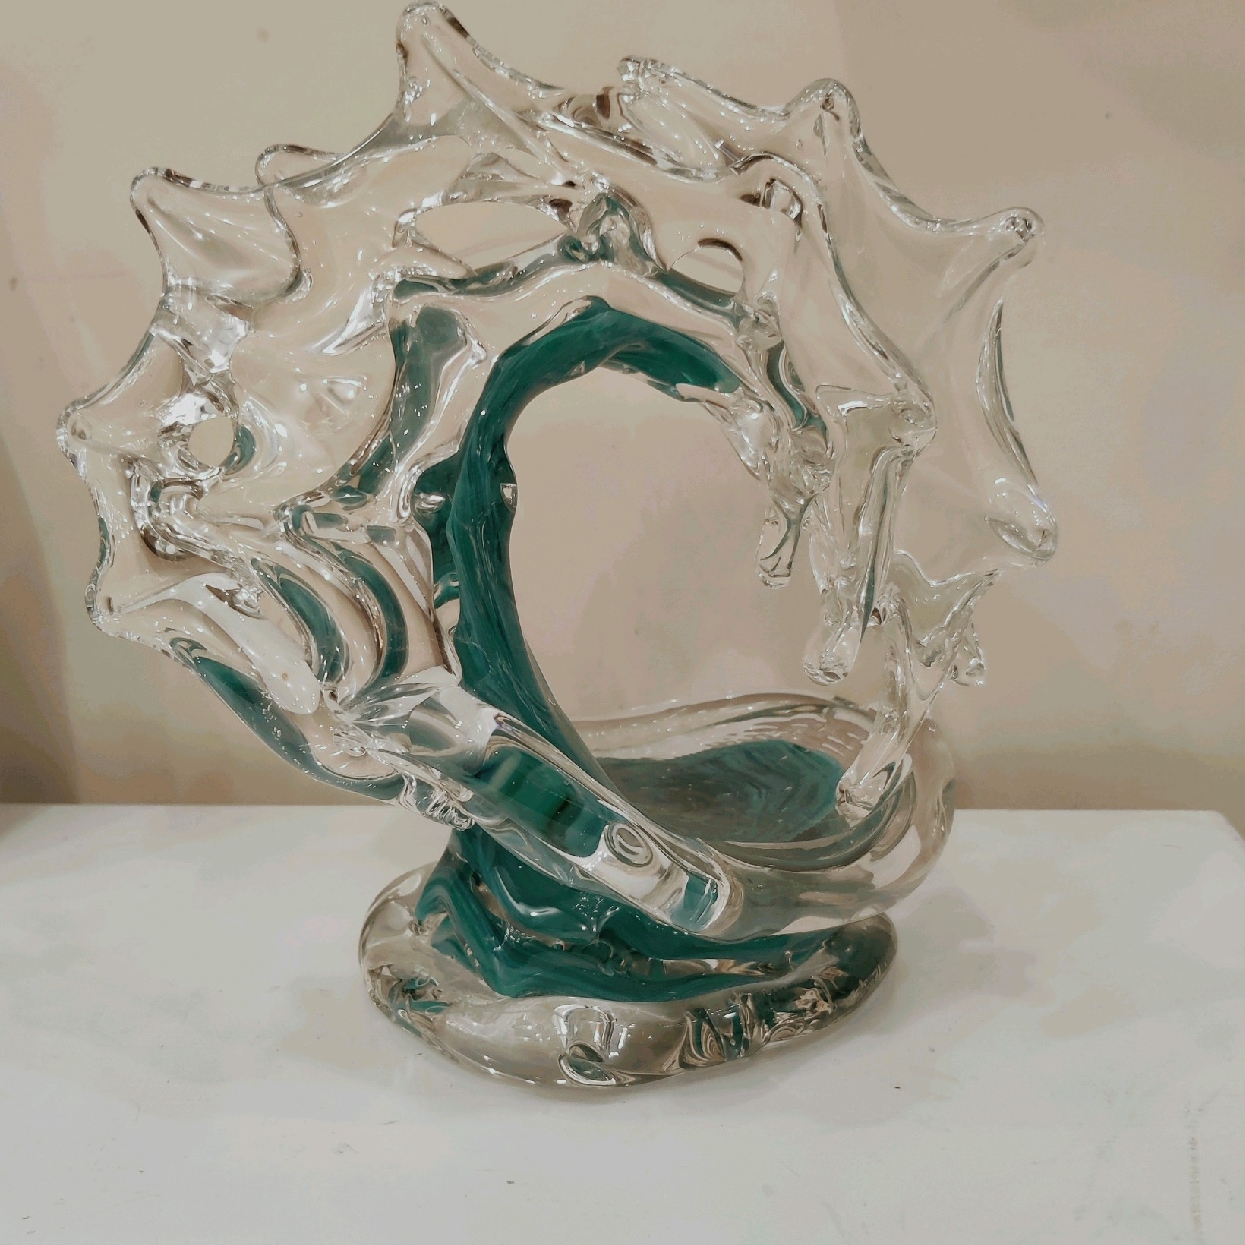 David Wight Double Tsunami Turquoise Glass Sculpture

Comes with Lighted Box Display Stand